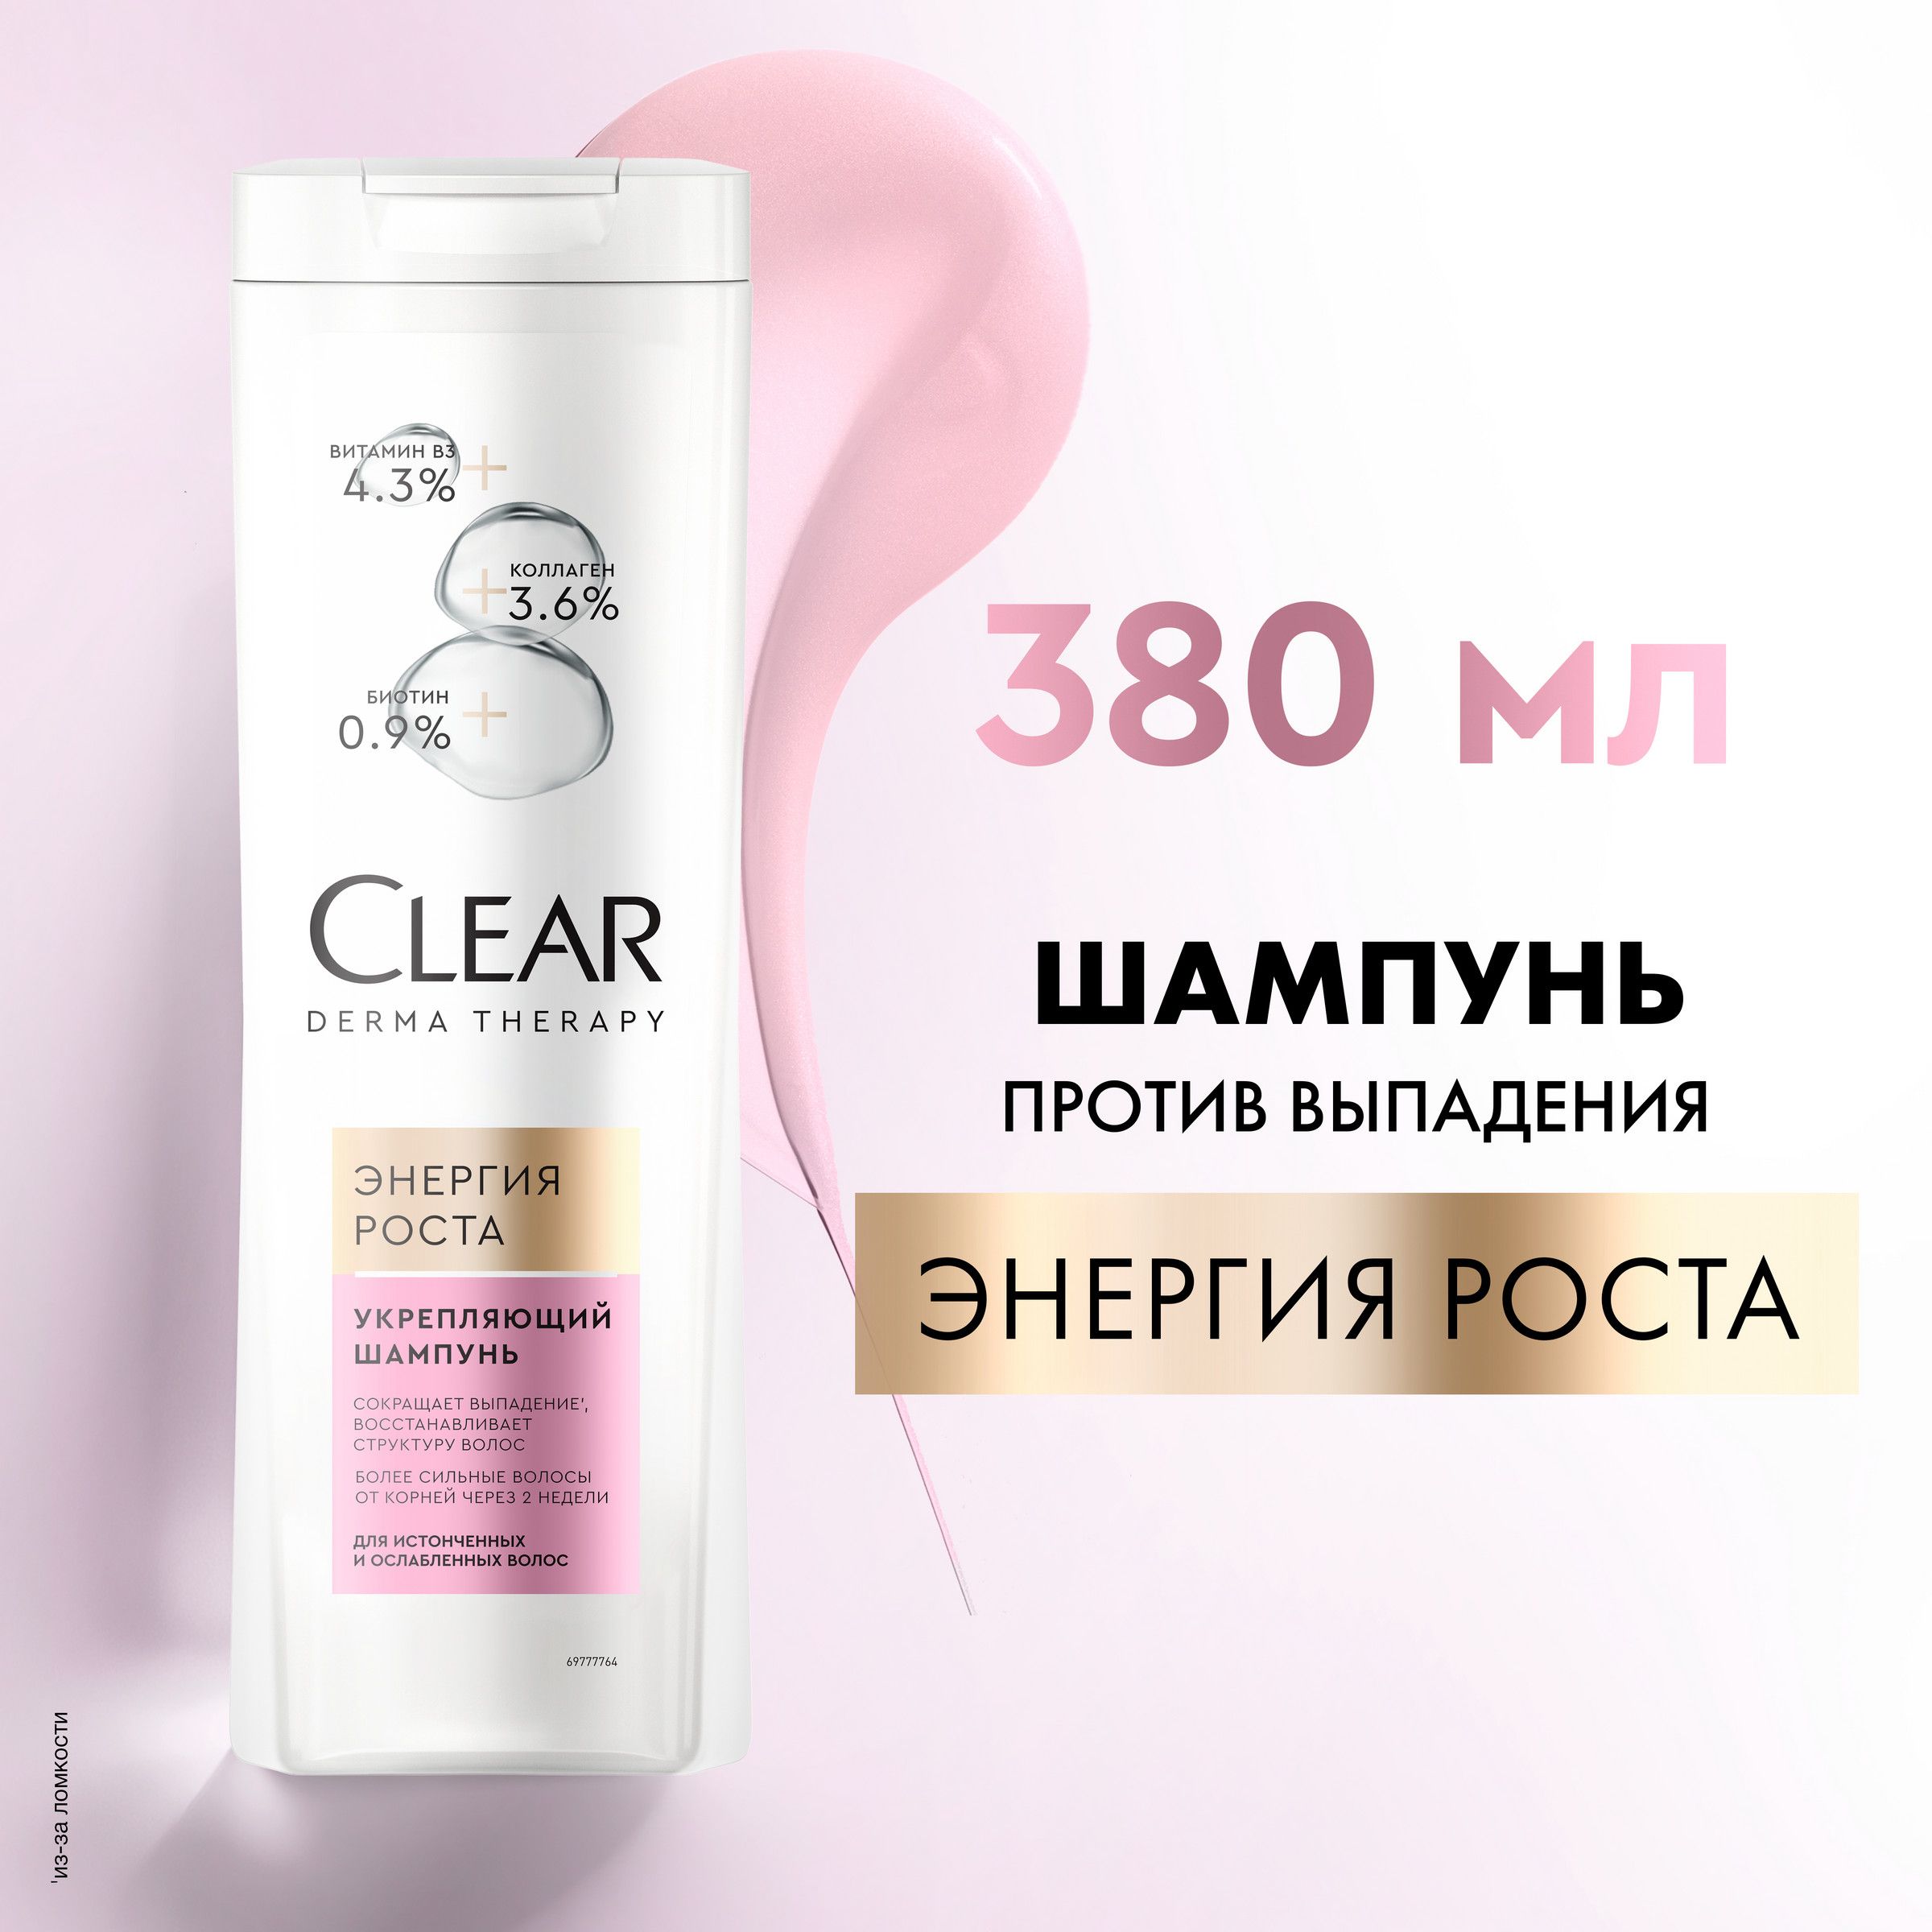 Clear derma therapy отзывы. Clear дерма шампунь. Clear Derma Therapy бальзам и шампунь. Клер шампунь для волос. Clear Derma Therapy энергия роста.